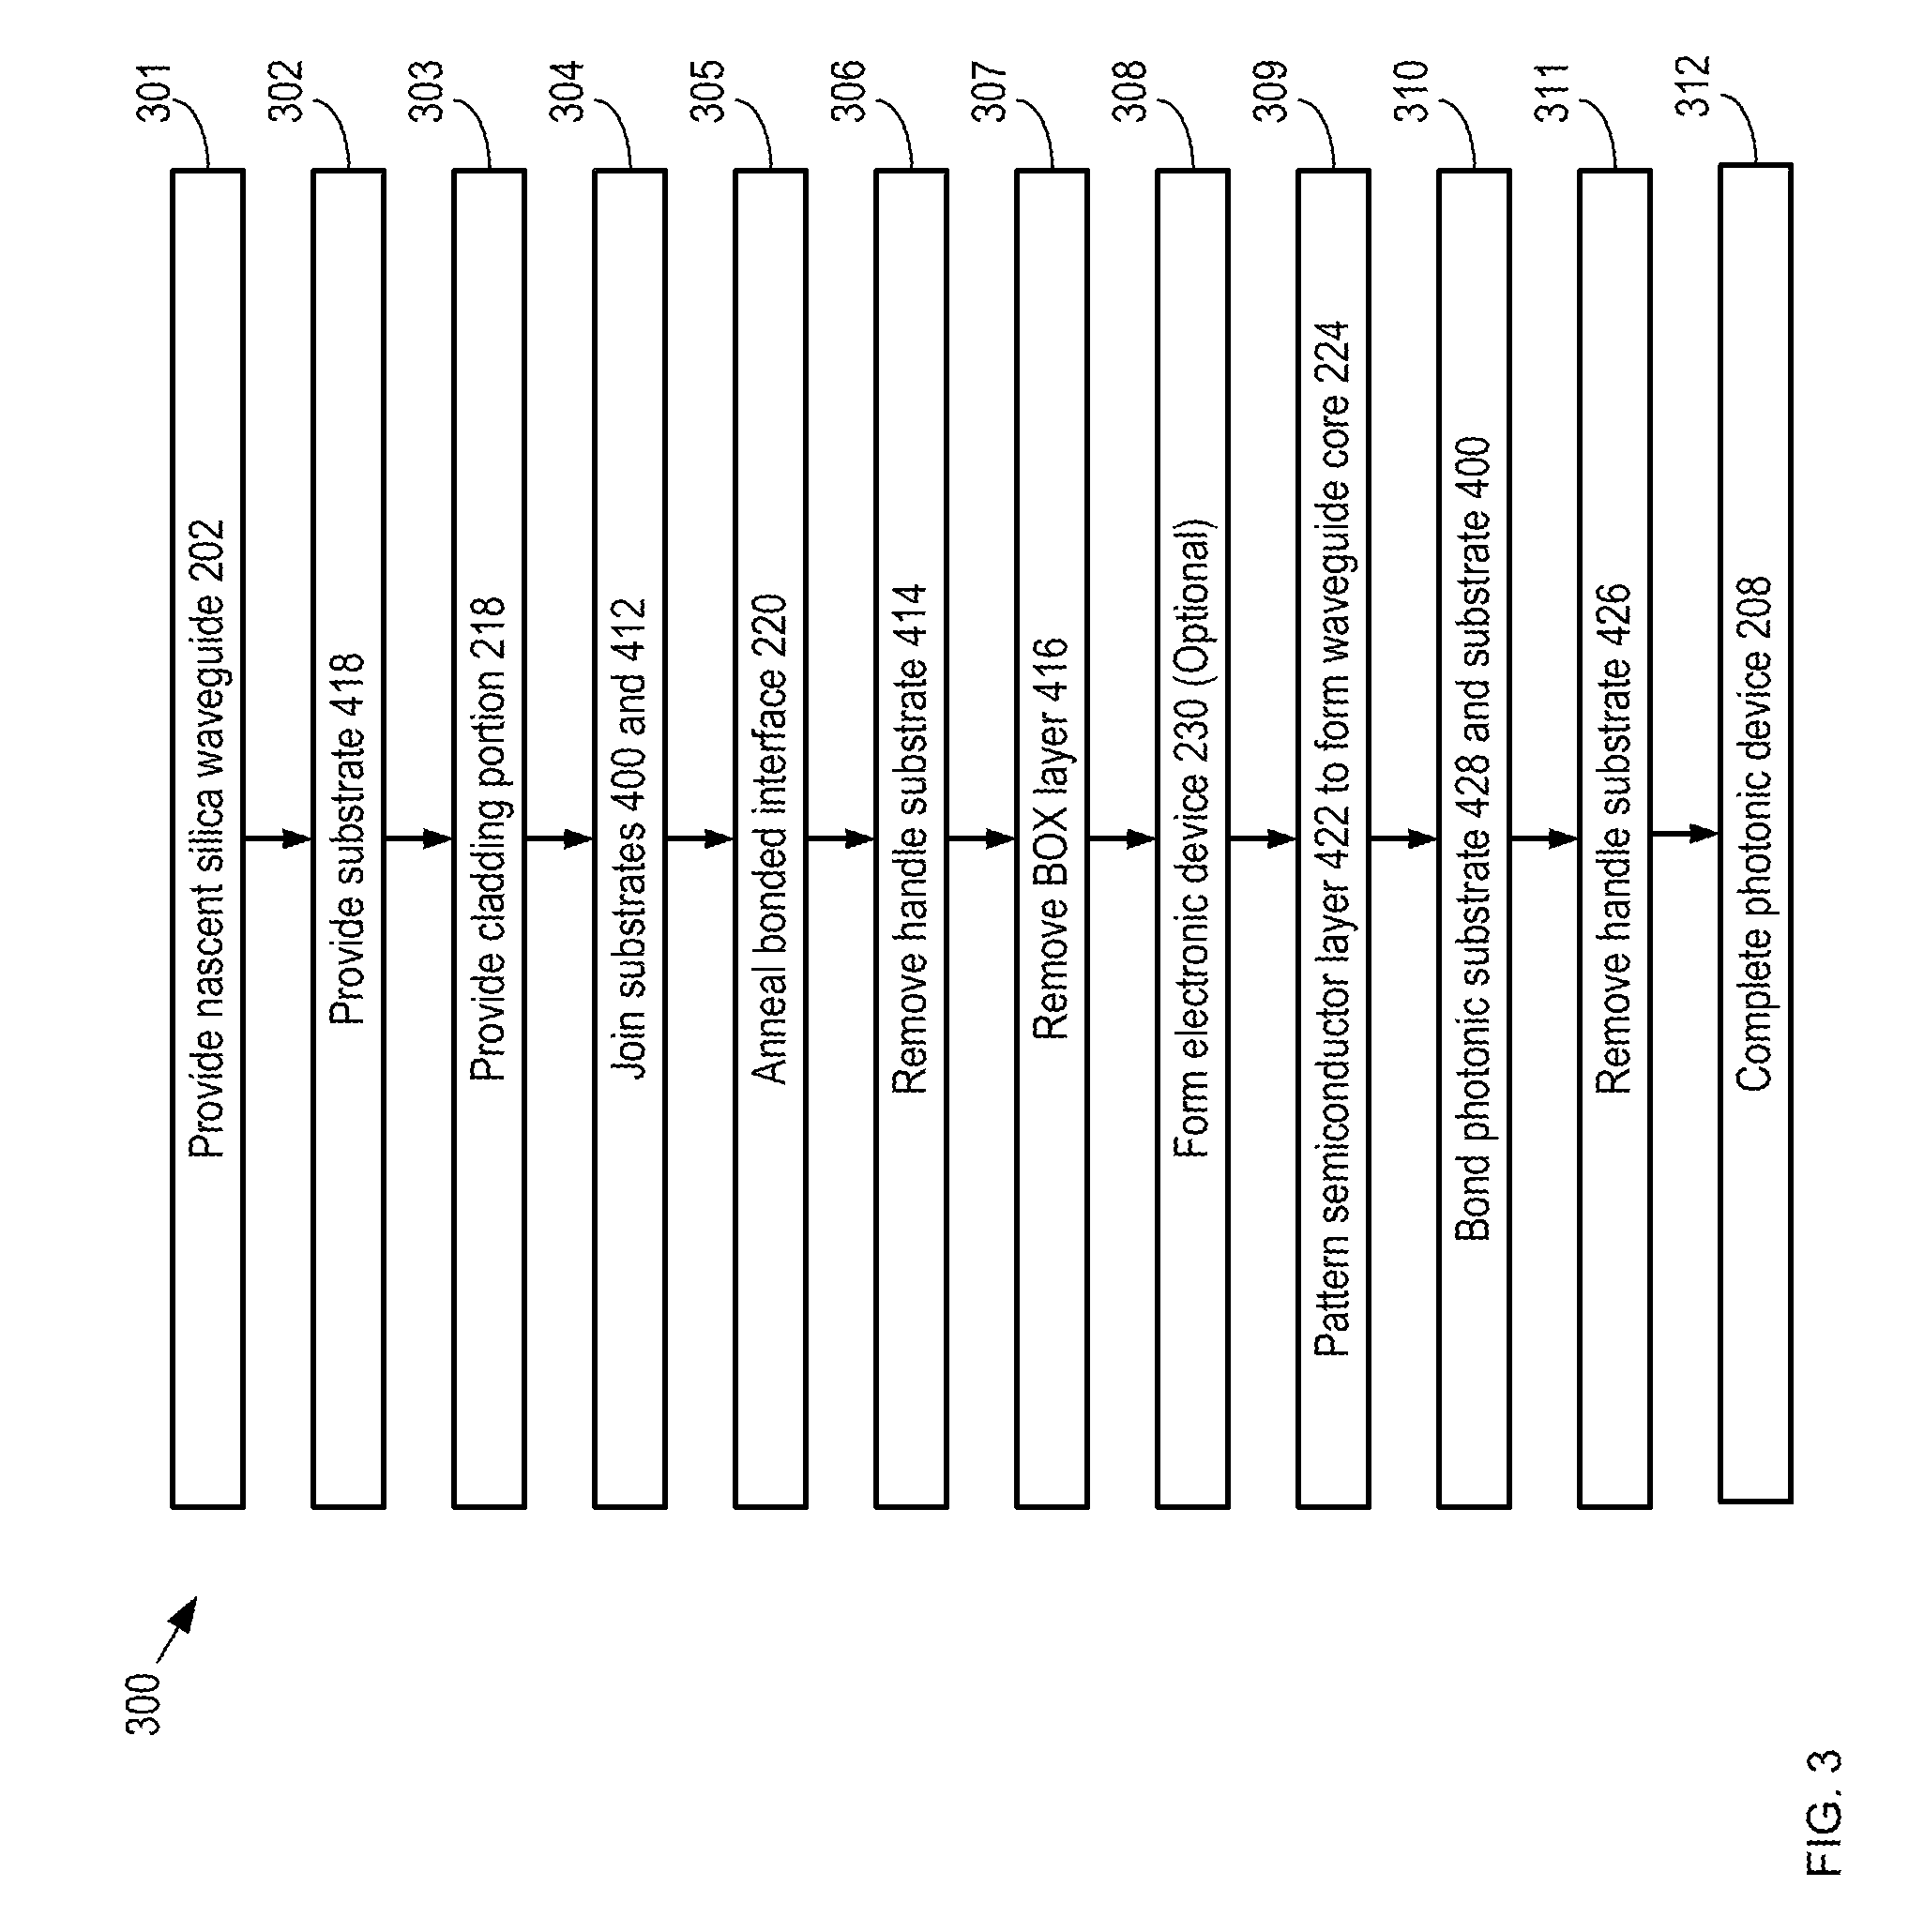 Integrated dielectric waveguide and semiconductor layer and method therefor